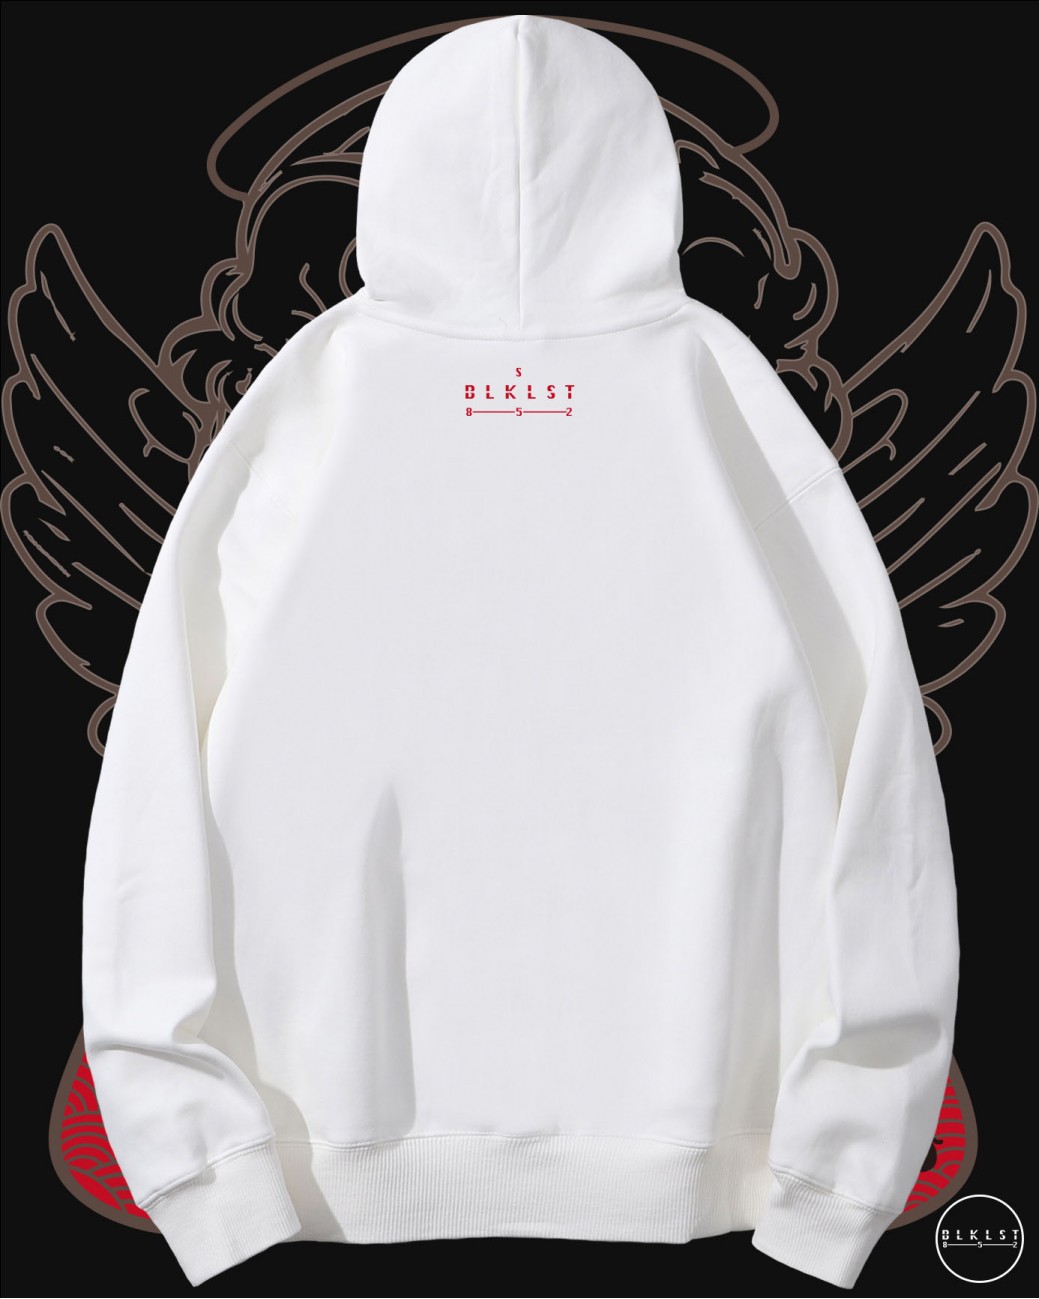 LETTER A HOODIE